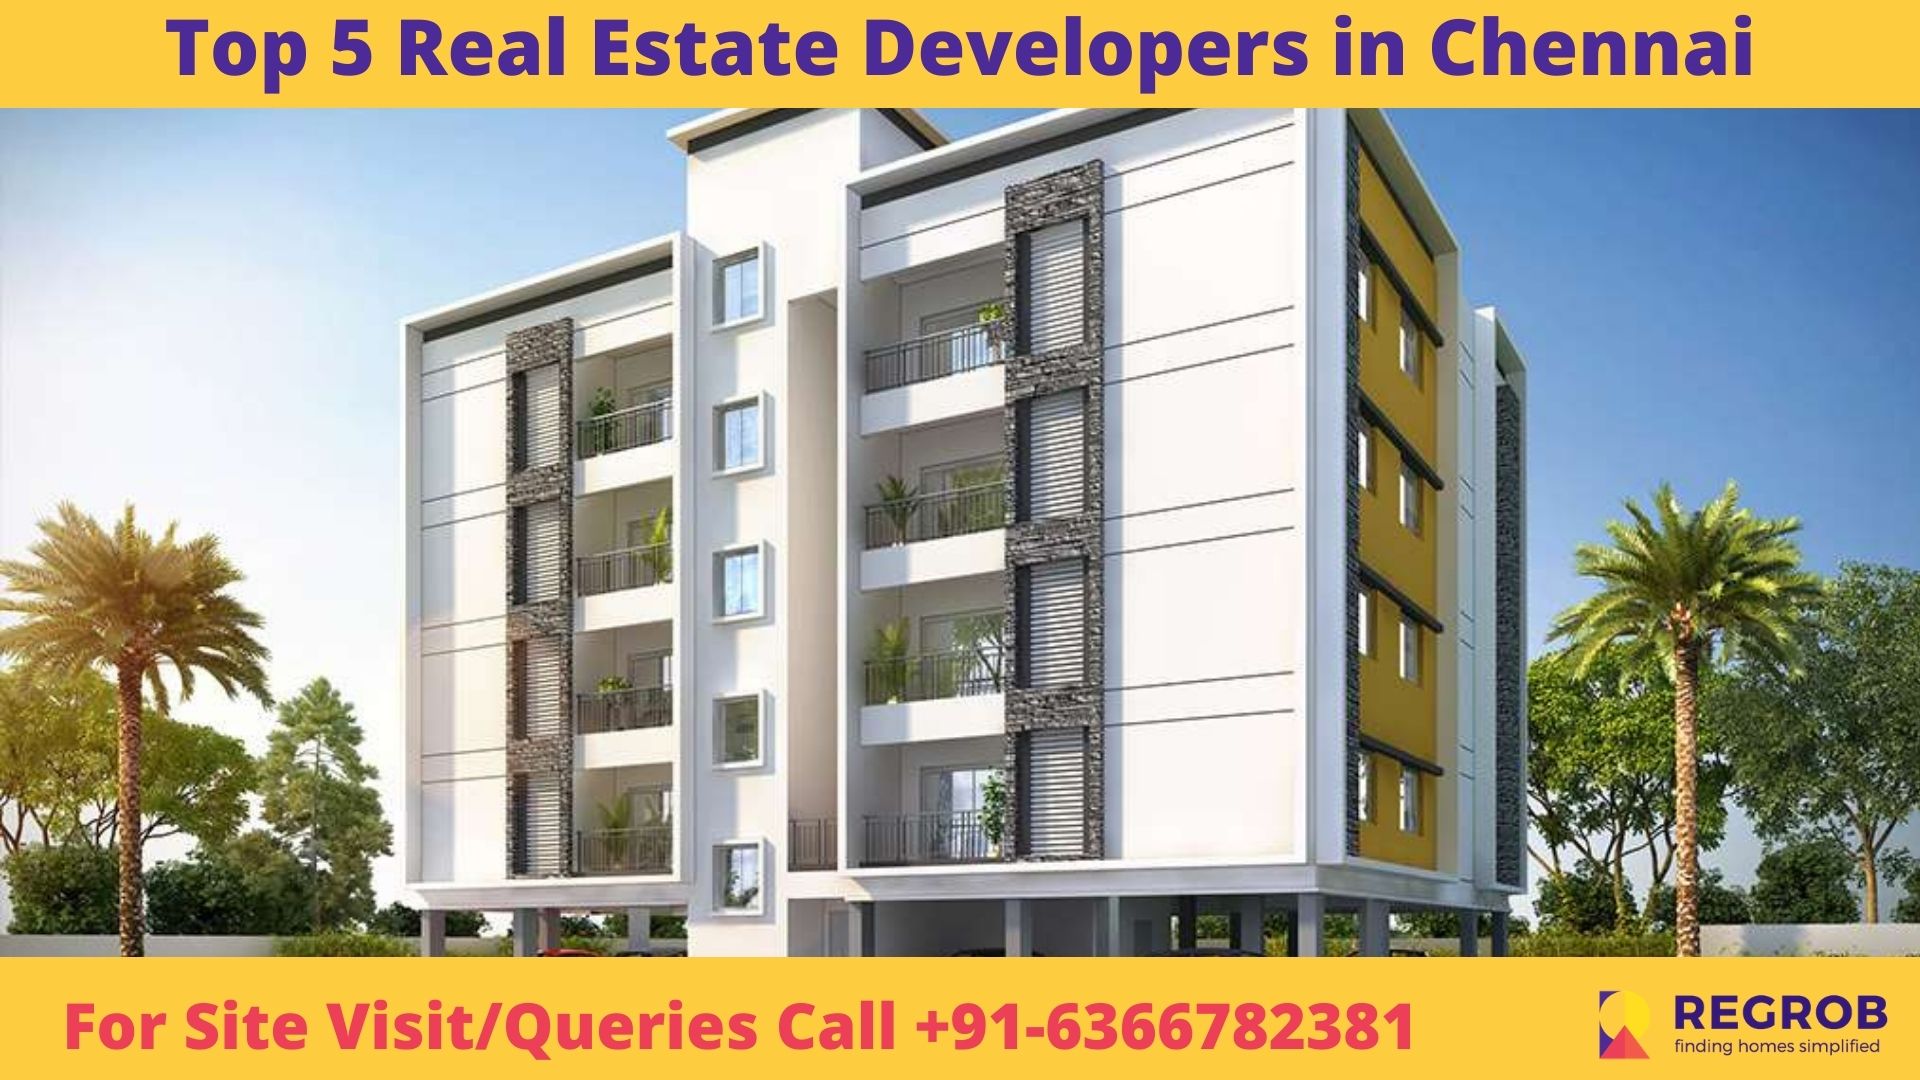 Top 5 Real Estate developers in Chennai